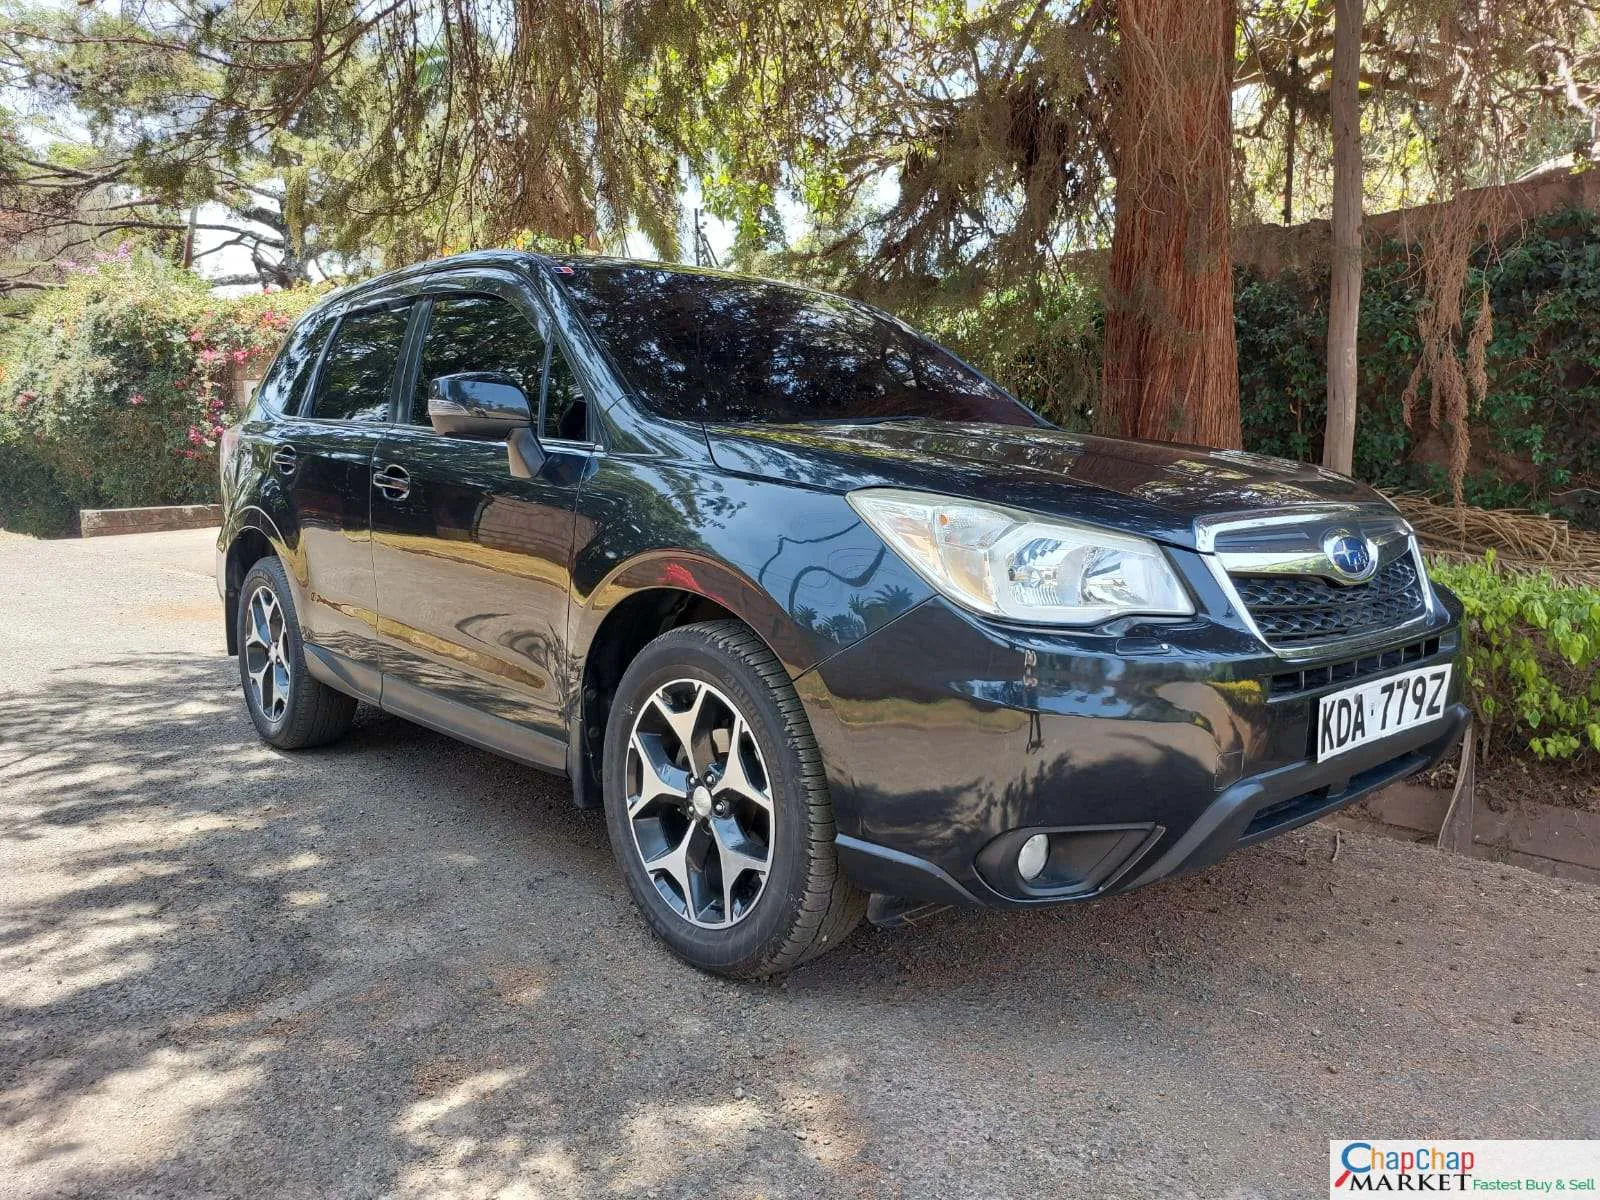 Cars Cars For Sale/Vehicles-Subaru Forester SJ5 You Pay 30% deposit 70% installments Trade in Ok 9